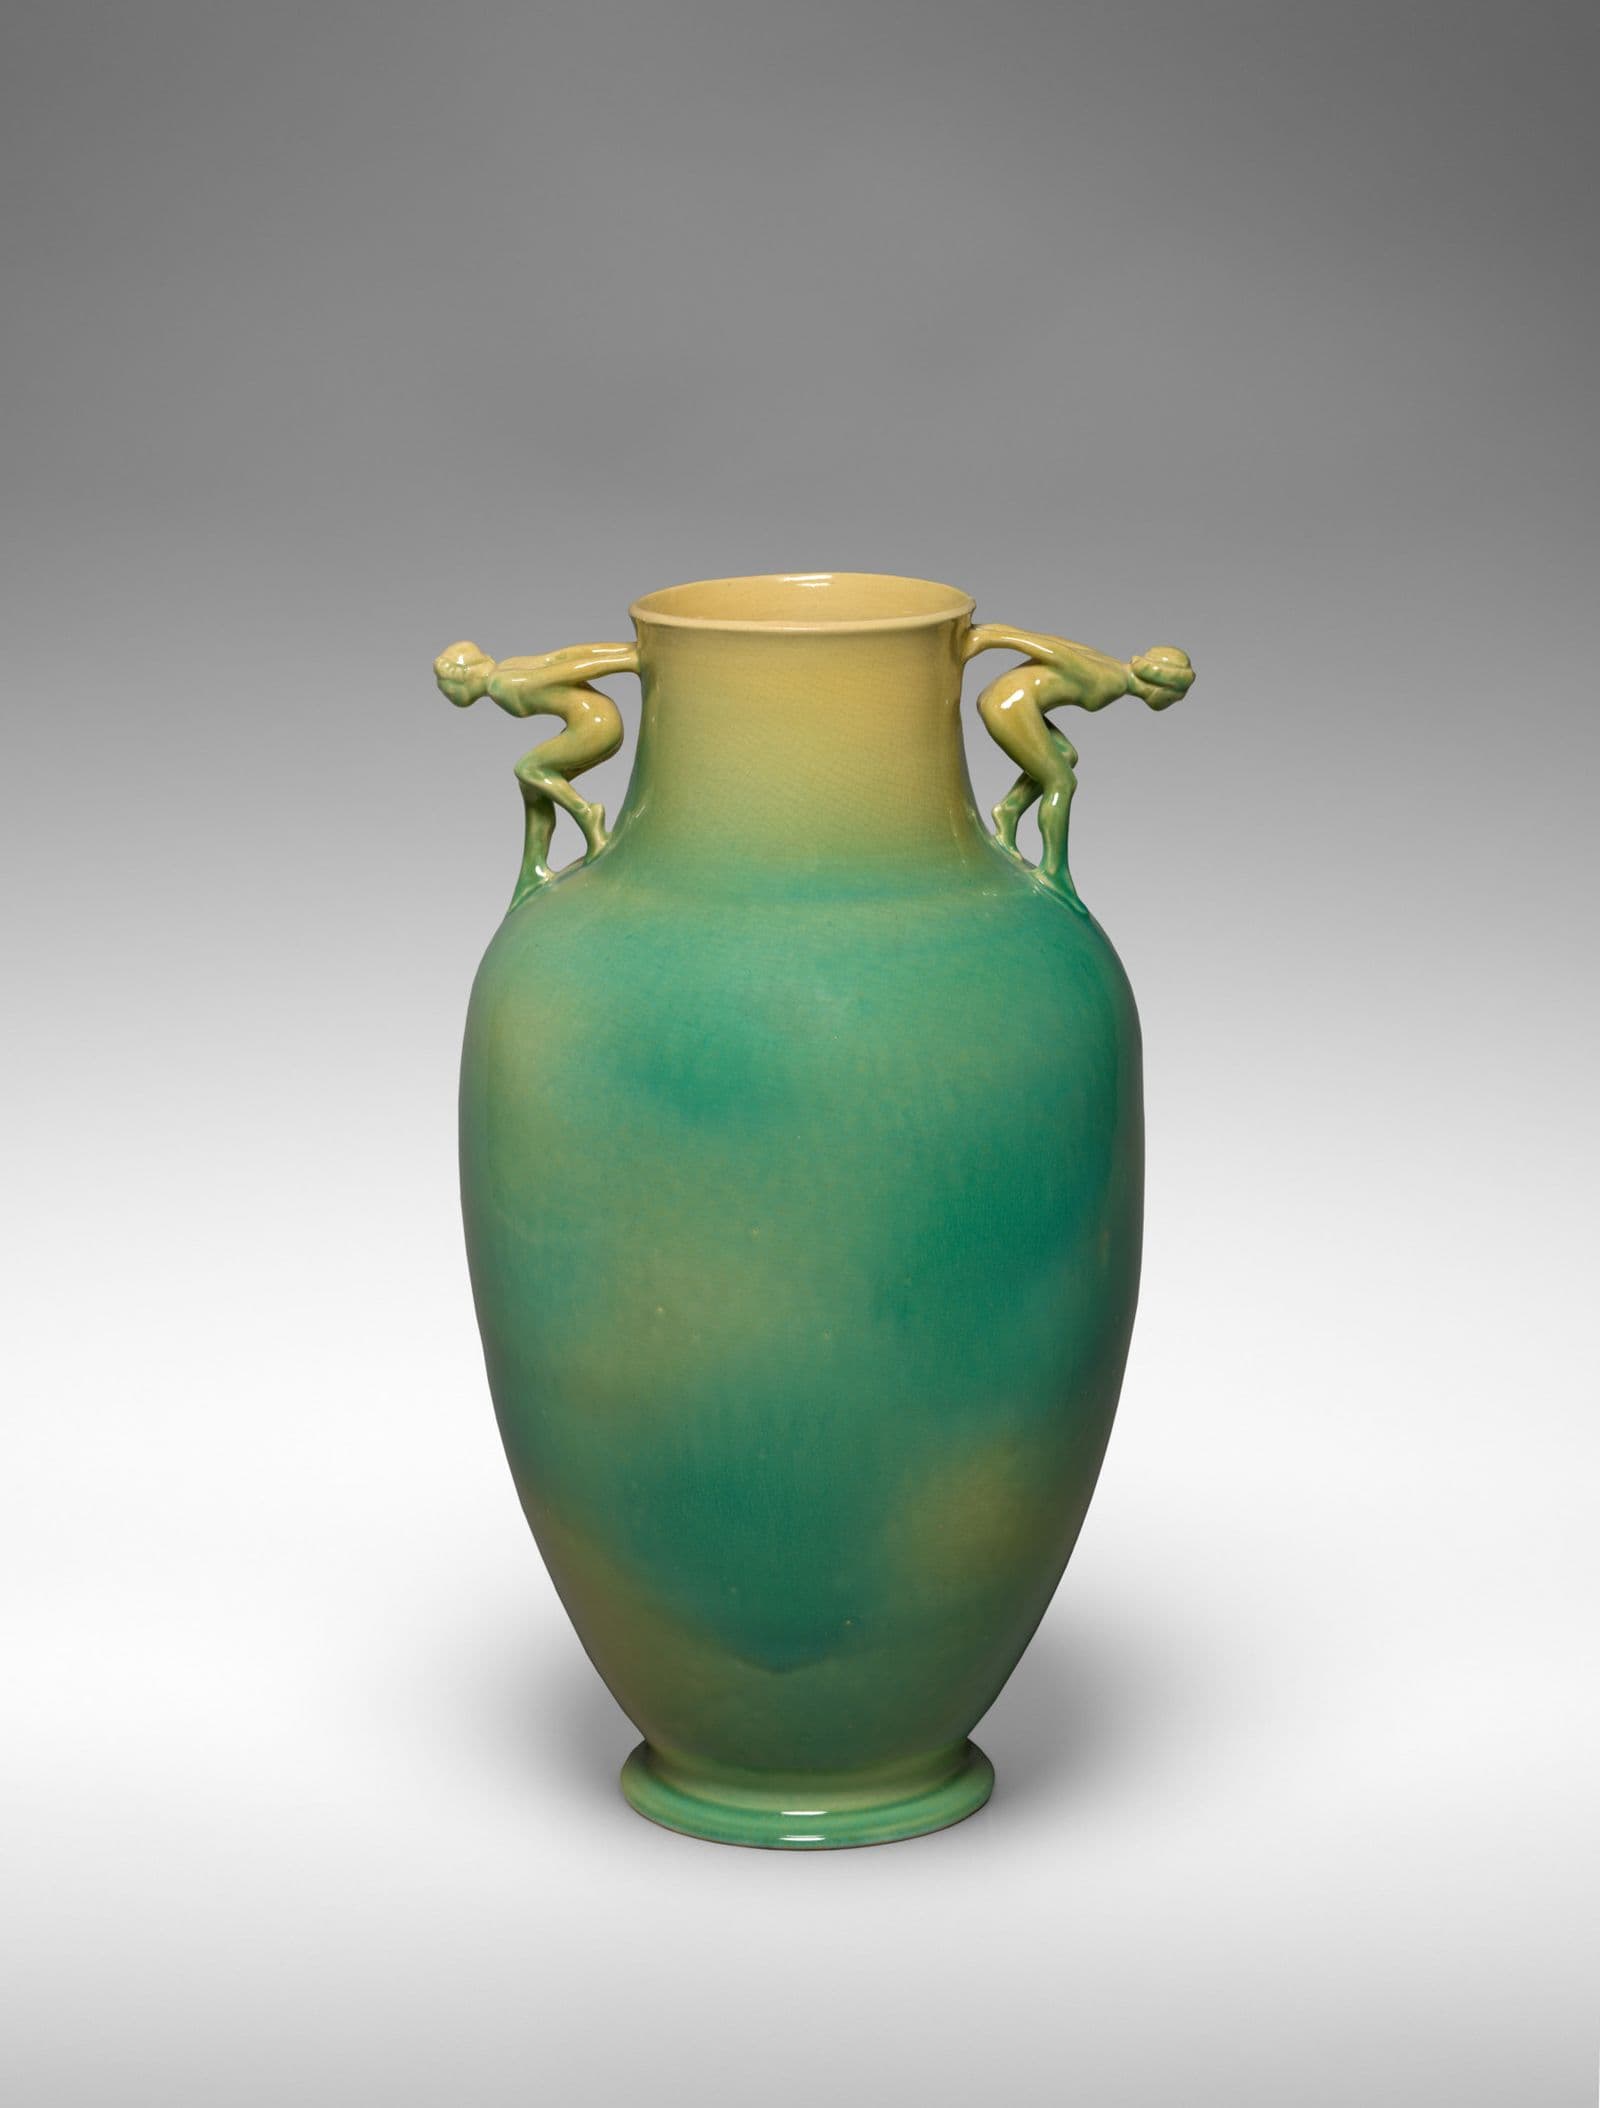 Green vase with human figures as handles